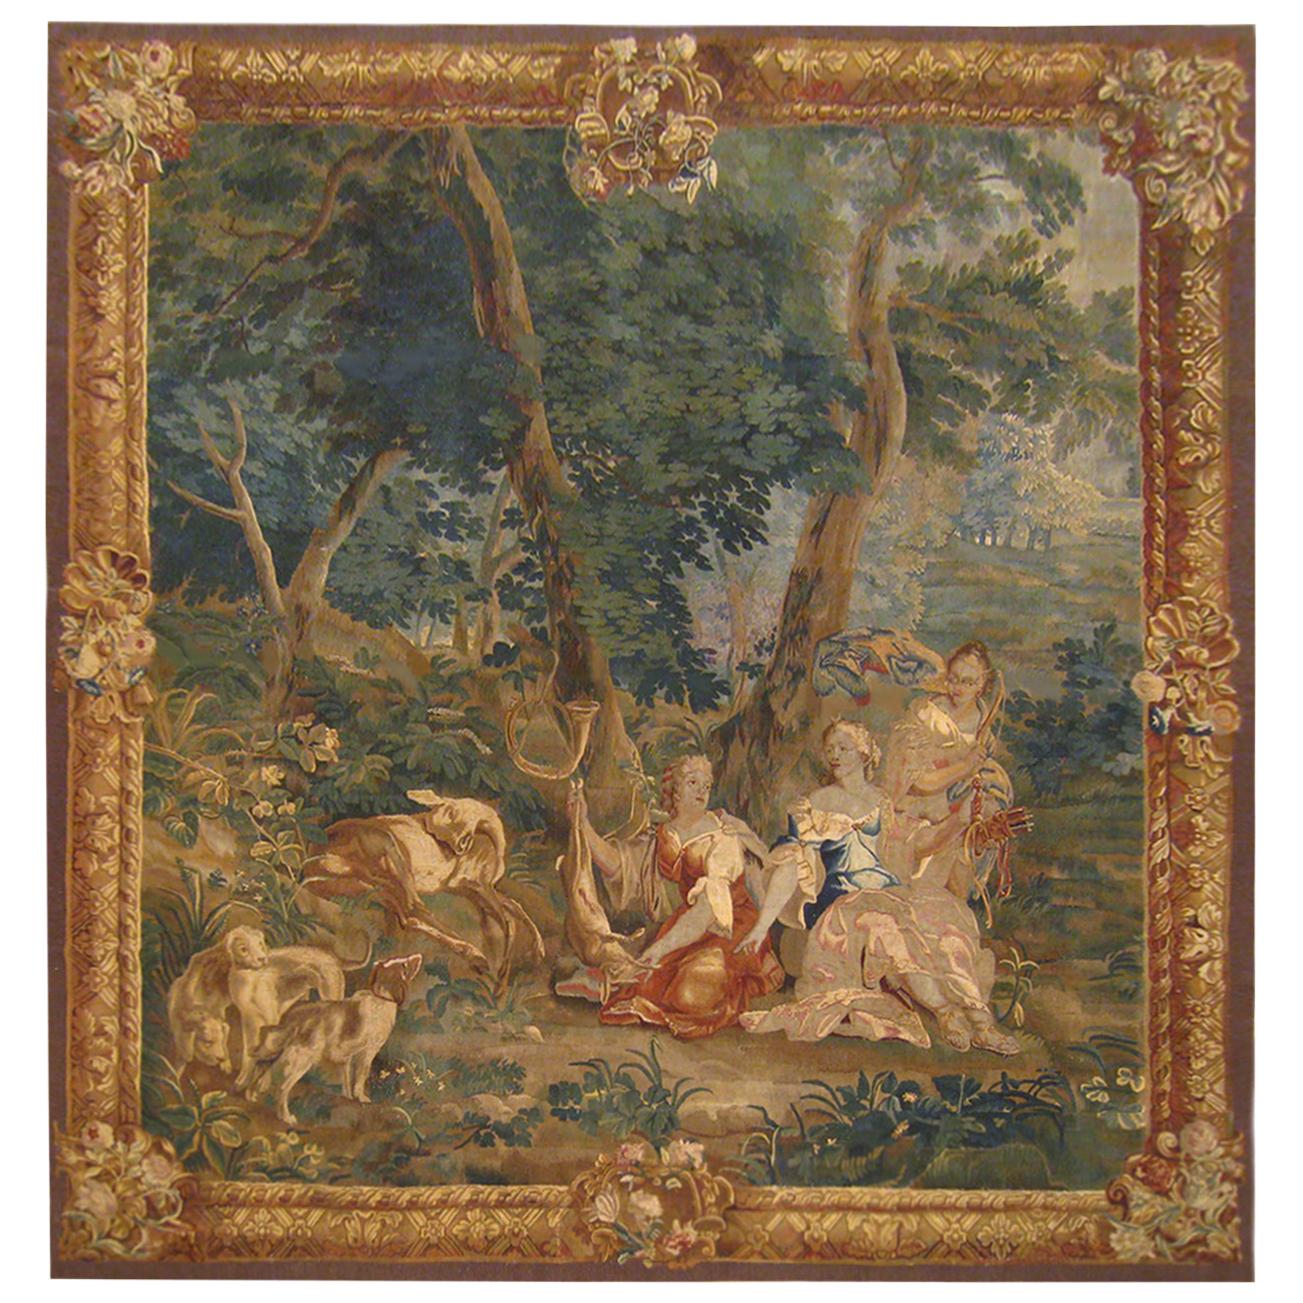 Antique 18th Century Brussels Mythological Tapestry, with Diana the Huntress